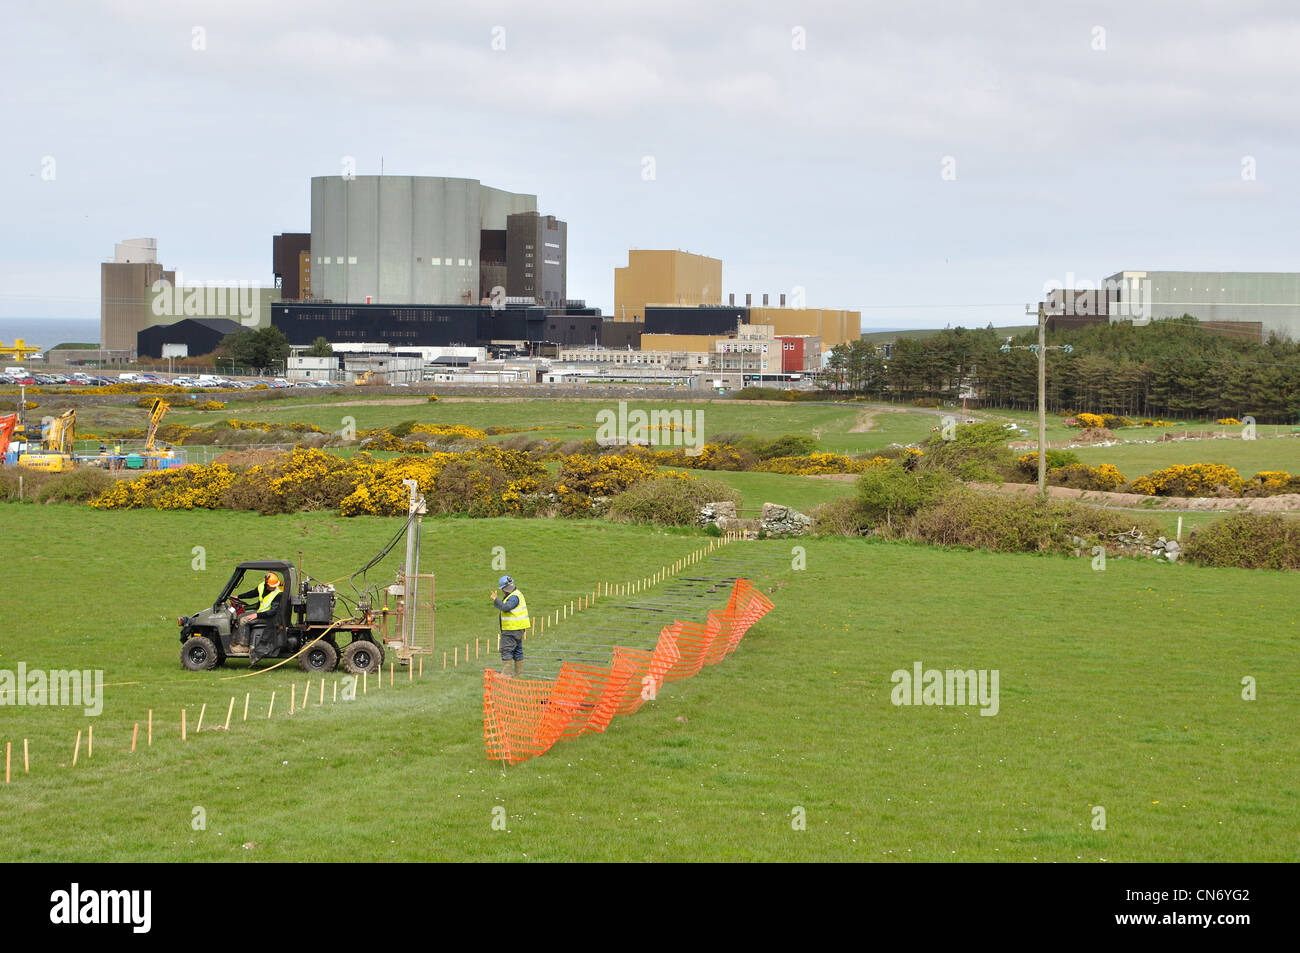 Wylfa nuclear power station is a potential site for a new generation of nuclear power plant. The site has already been surveyed. Stock Photo